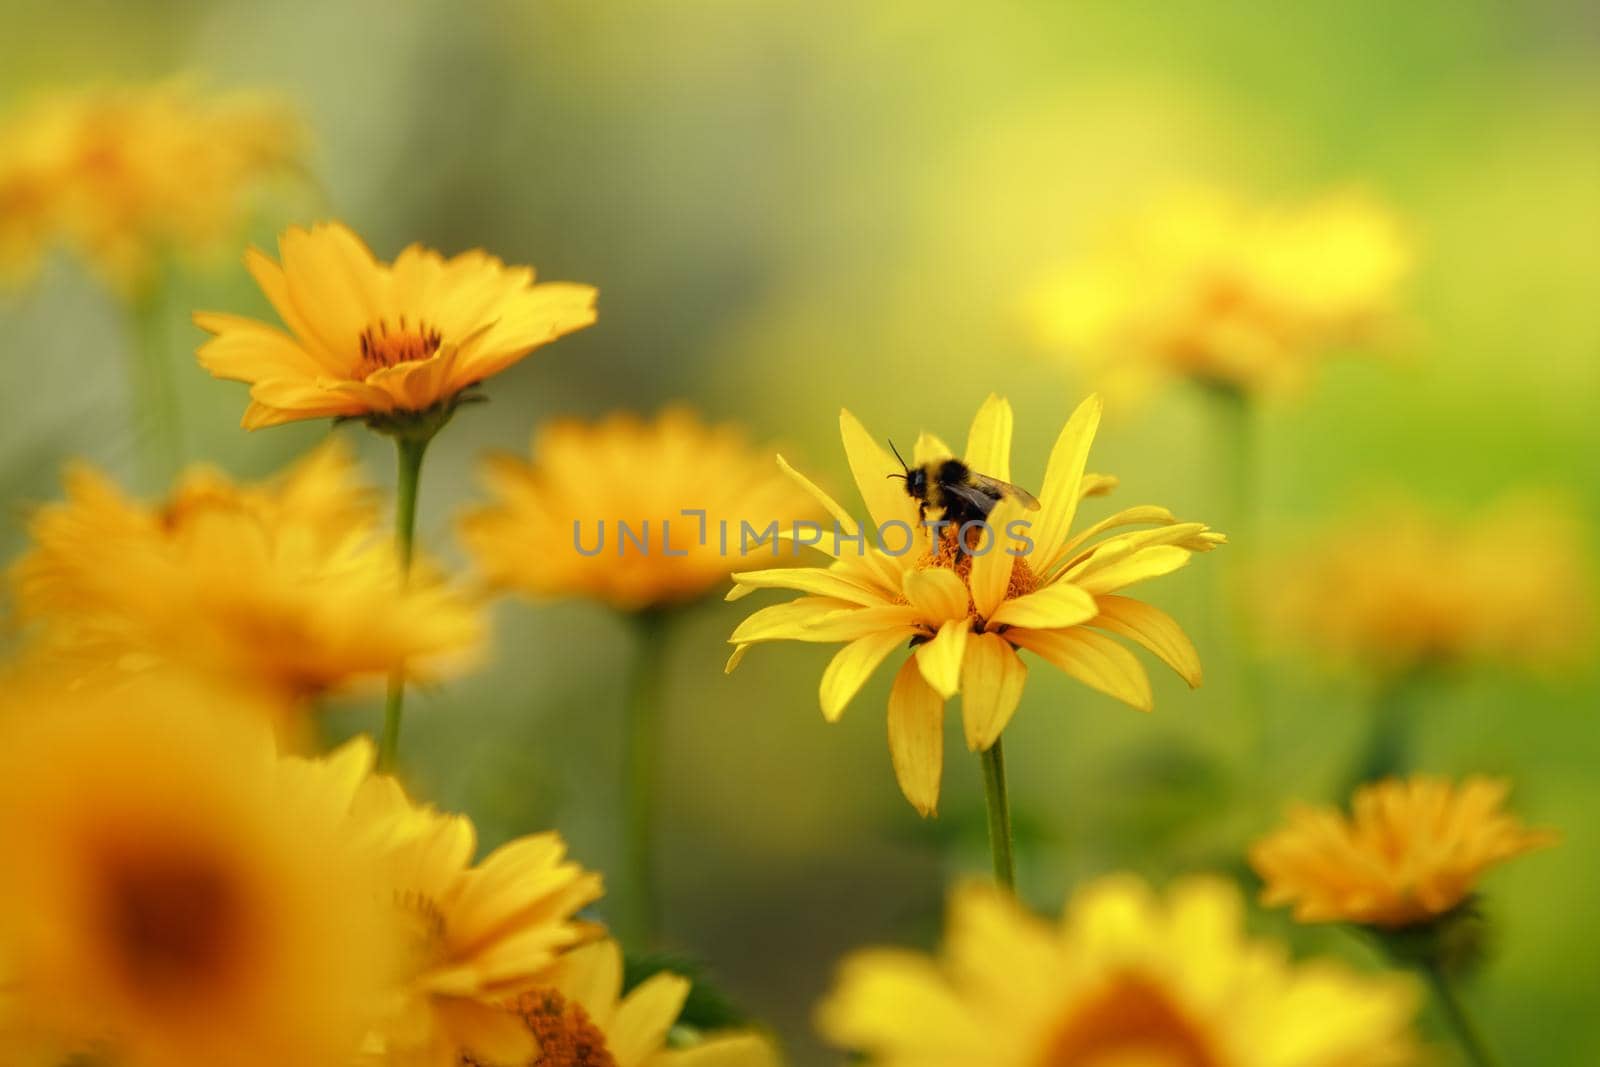 Abstract photo of a blurred background of a yellow flower field. Bumblebee on the flower. by Lincikas